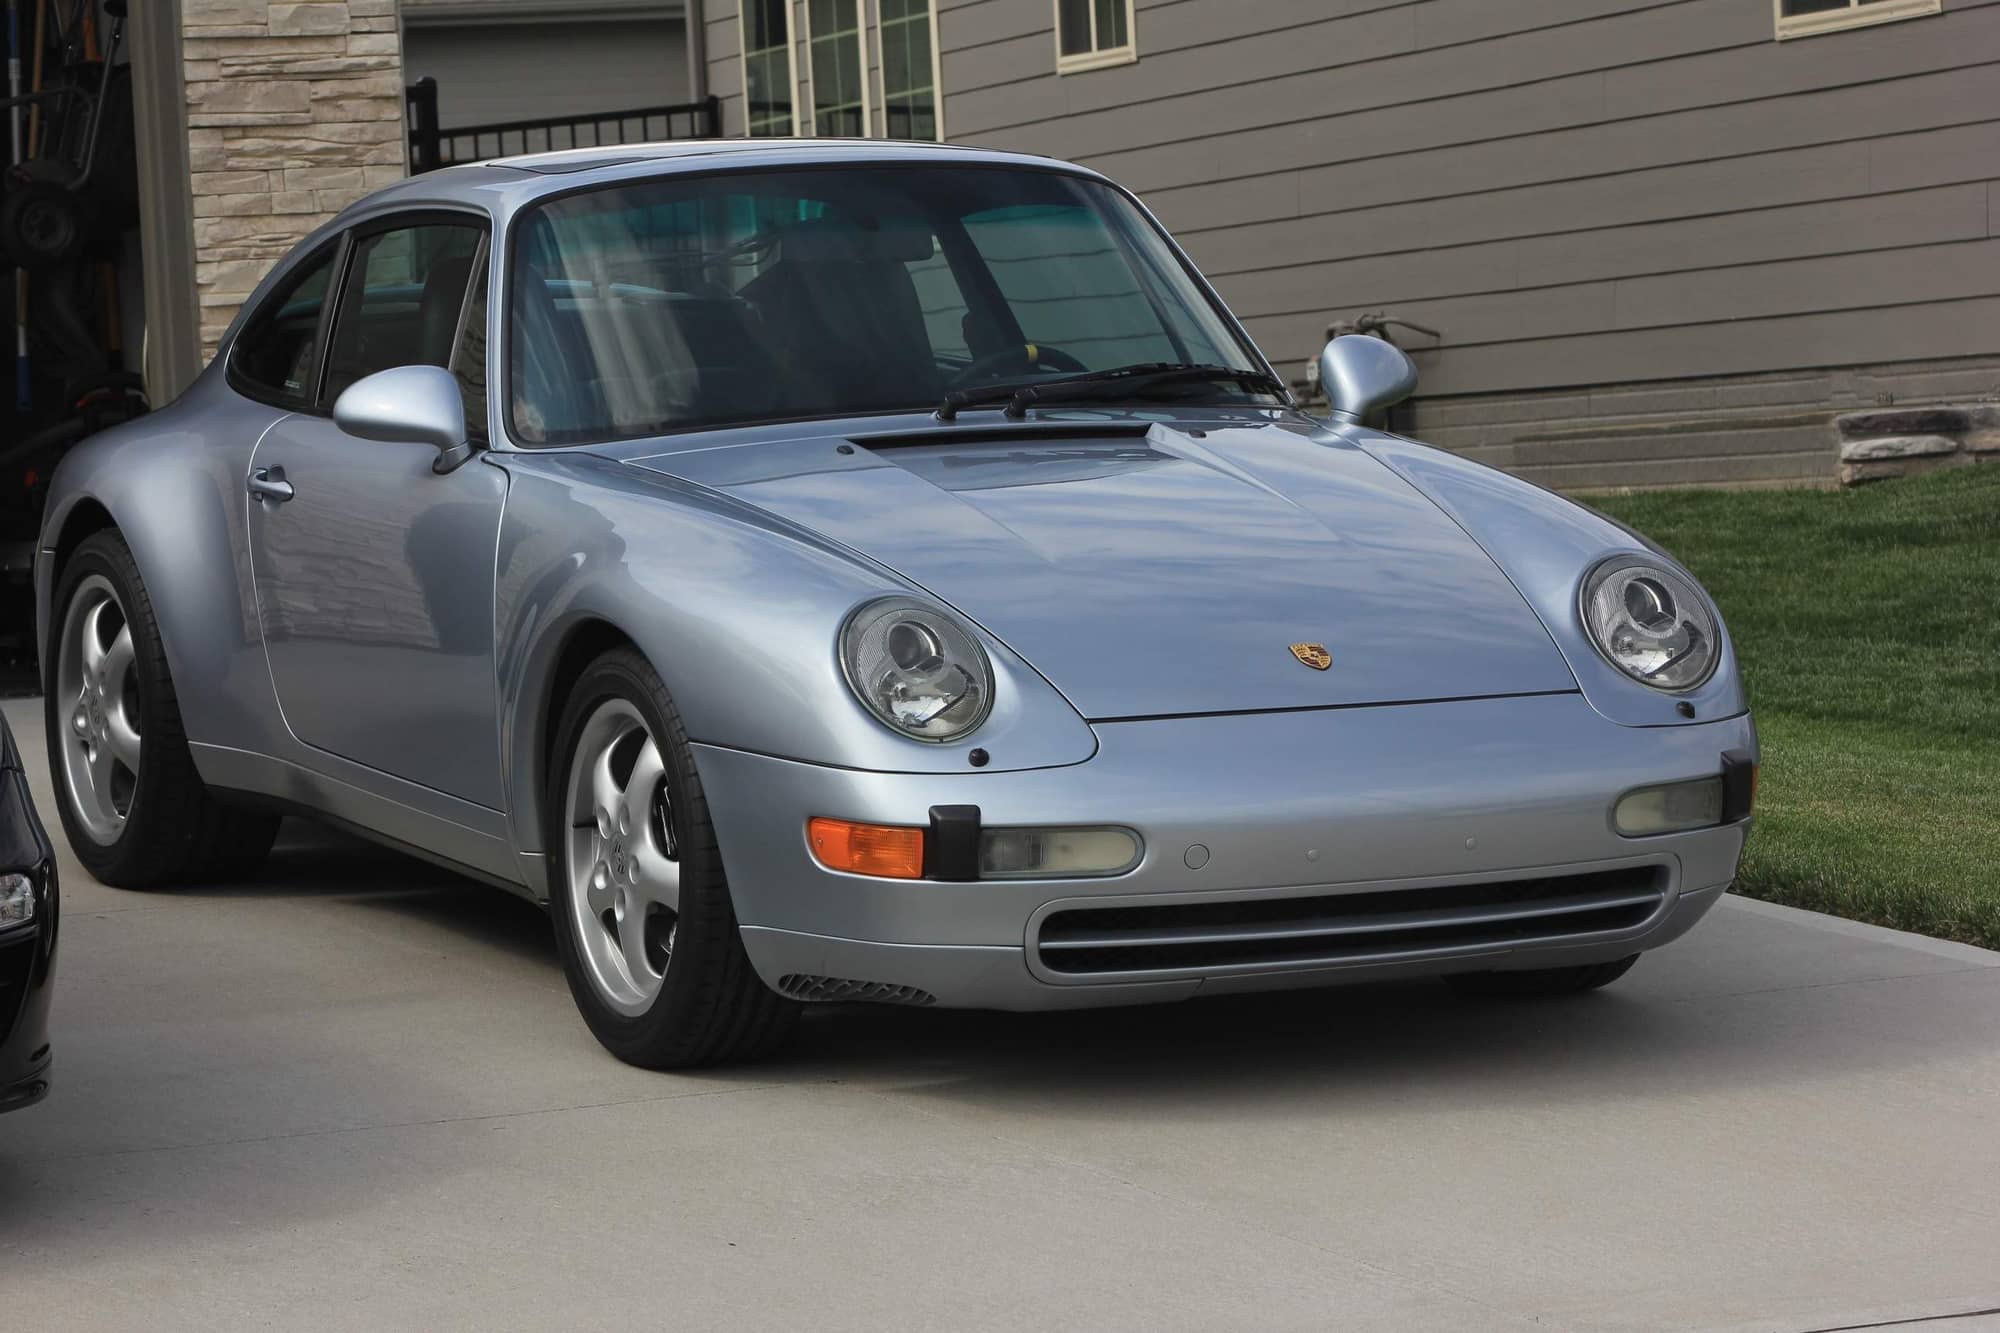 1995 Porsche 911 - 1995 Carrera - 6-speed - Polar Silver - Used - VIN wp0aa2990ss320828 - 97,700 Miles - 6 cyl - 2WD - Manual - Coupe - Silver - Omaha, NE 68022, United States